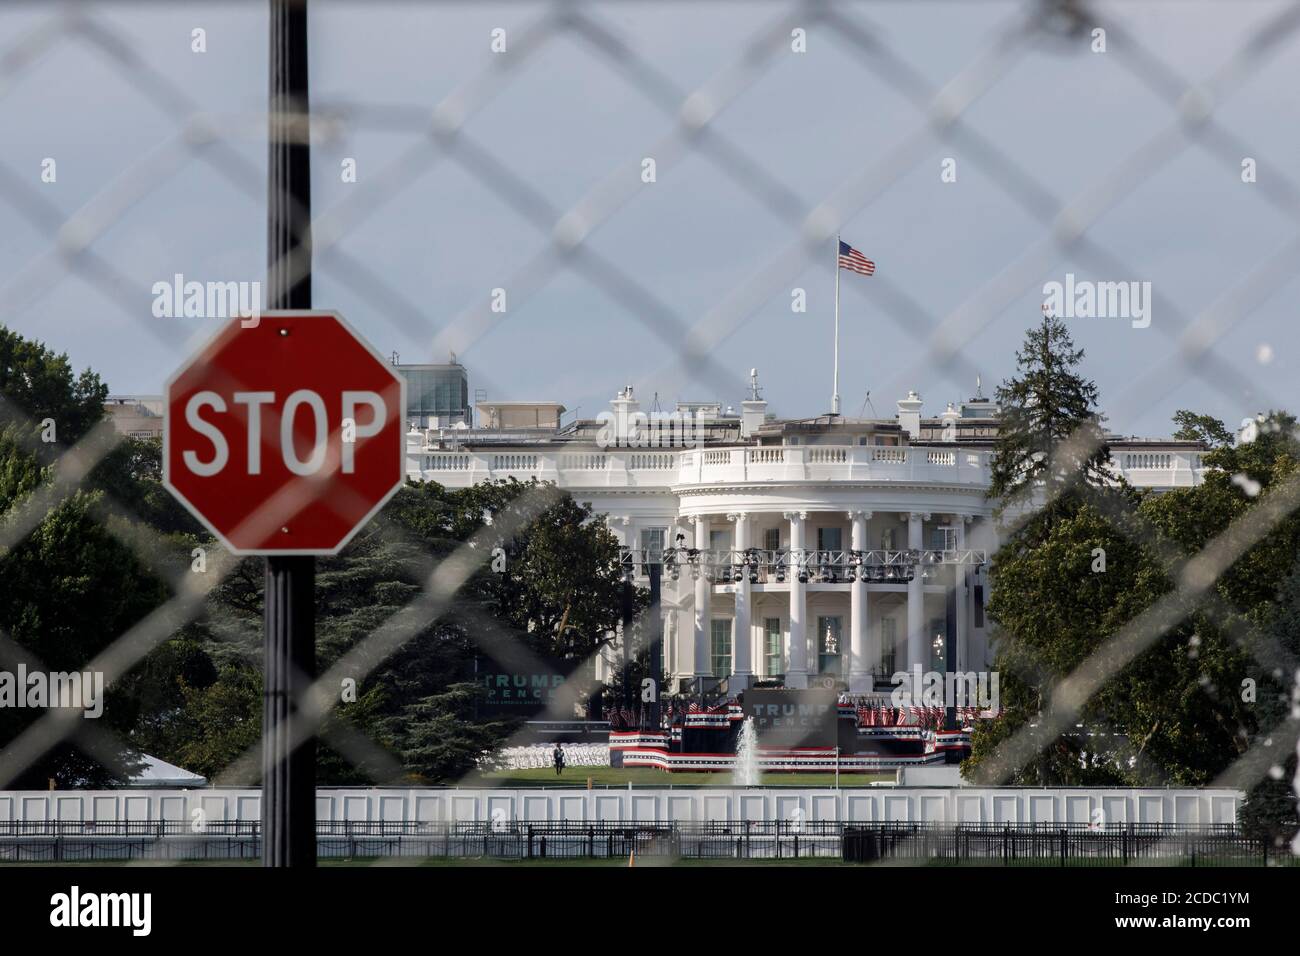 Washington, USA. 28th Aug, 2020. Security fences are set up outside the White House as U.S. President Donald Trump plans to deliver his Republican National Convention (RNC) acceptance speech at the White House, in Washington, DC, the United States, on Aug. 27, 2020. The White House has beefed up security ahead of U.S. President Donald Trump's speech to accept the Republican Party's renomination from the South Lawn on Thursday night, while protesters are expected to stage demonstrations in the capital city. Credit: Ting Shen/Xinhua/Alamy Live News Stock Photo